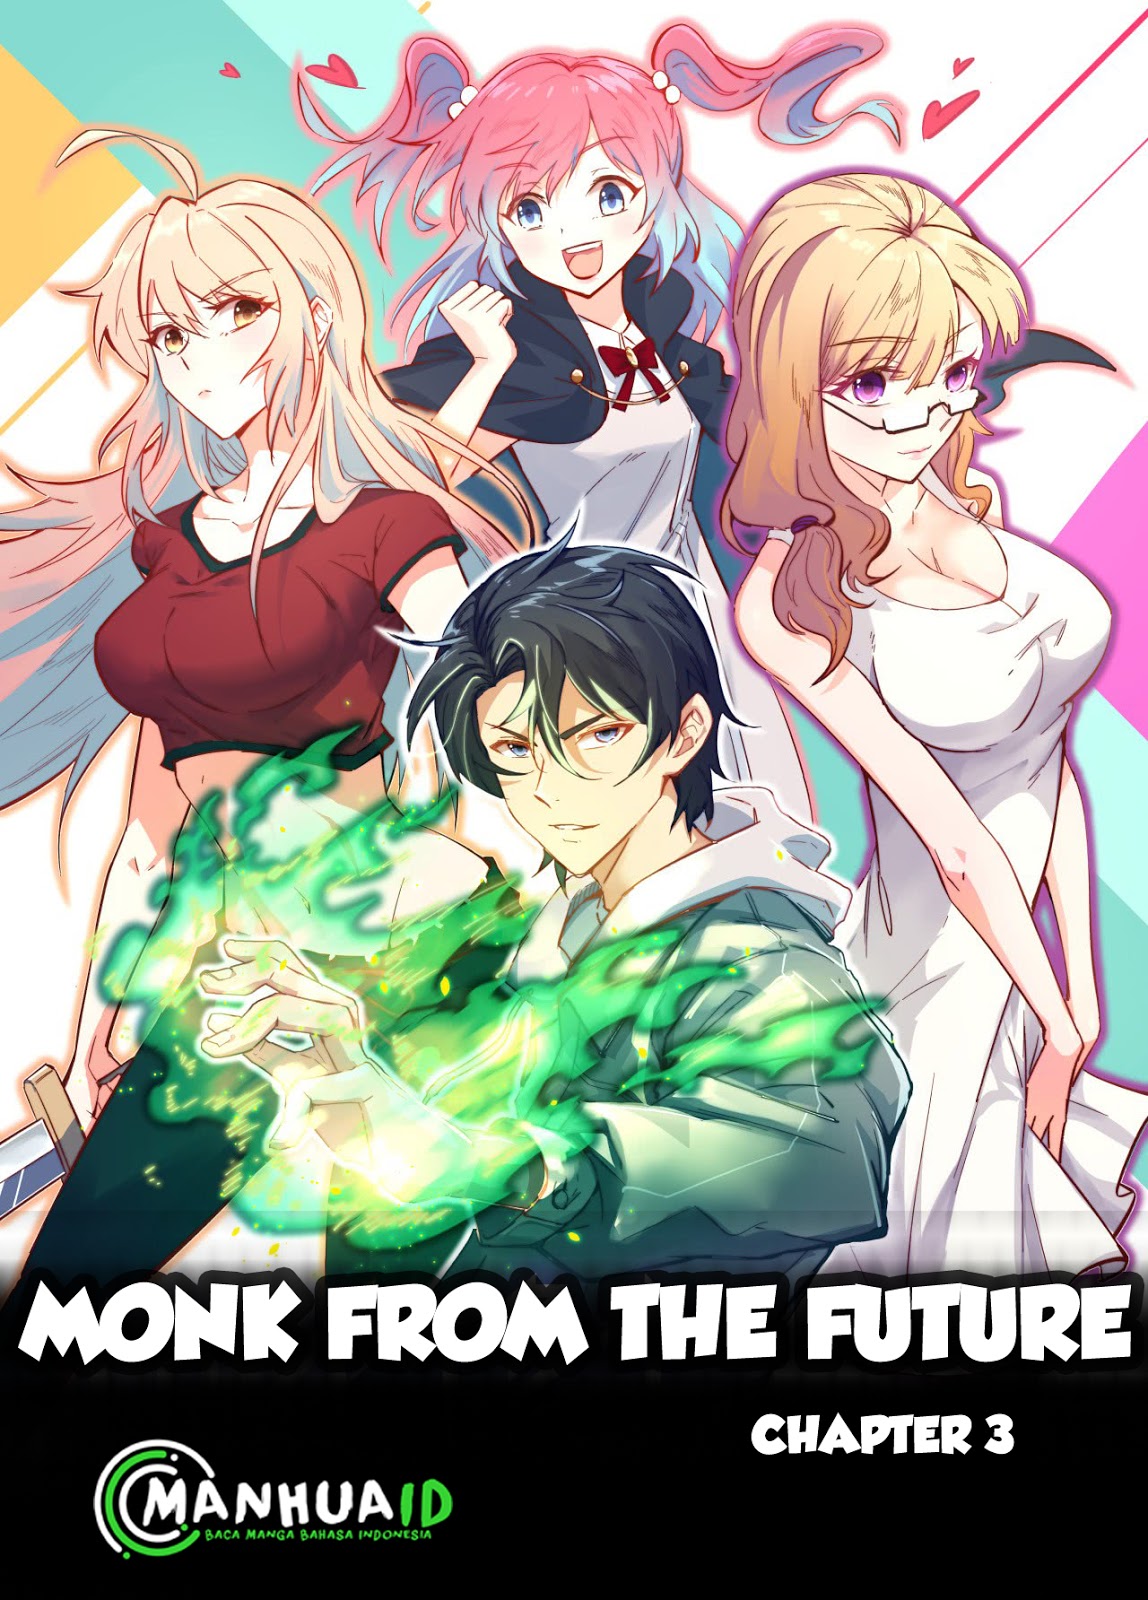 Monk From the Future Chapter 3